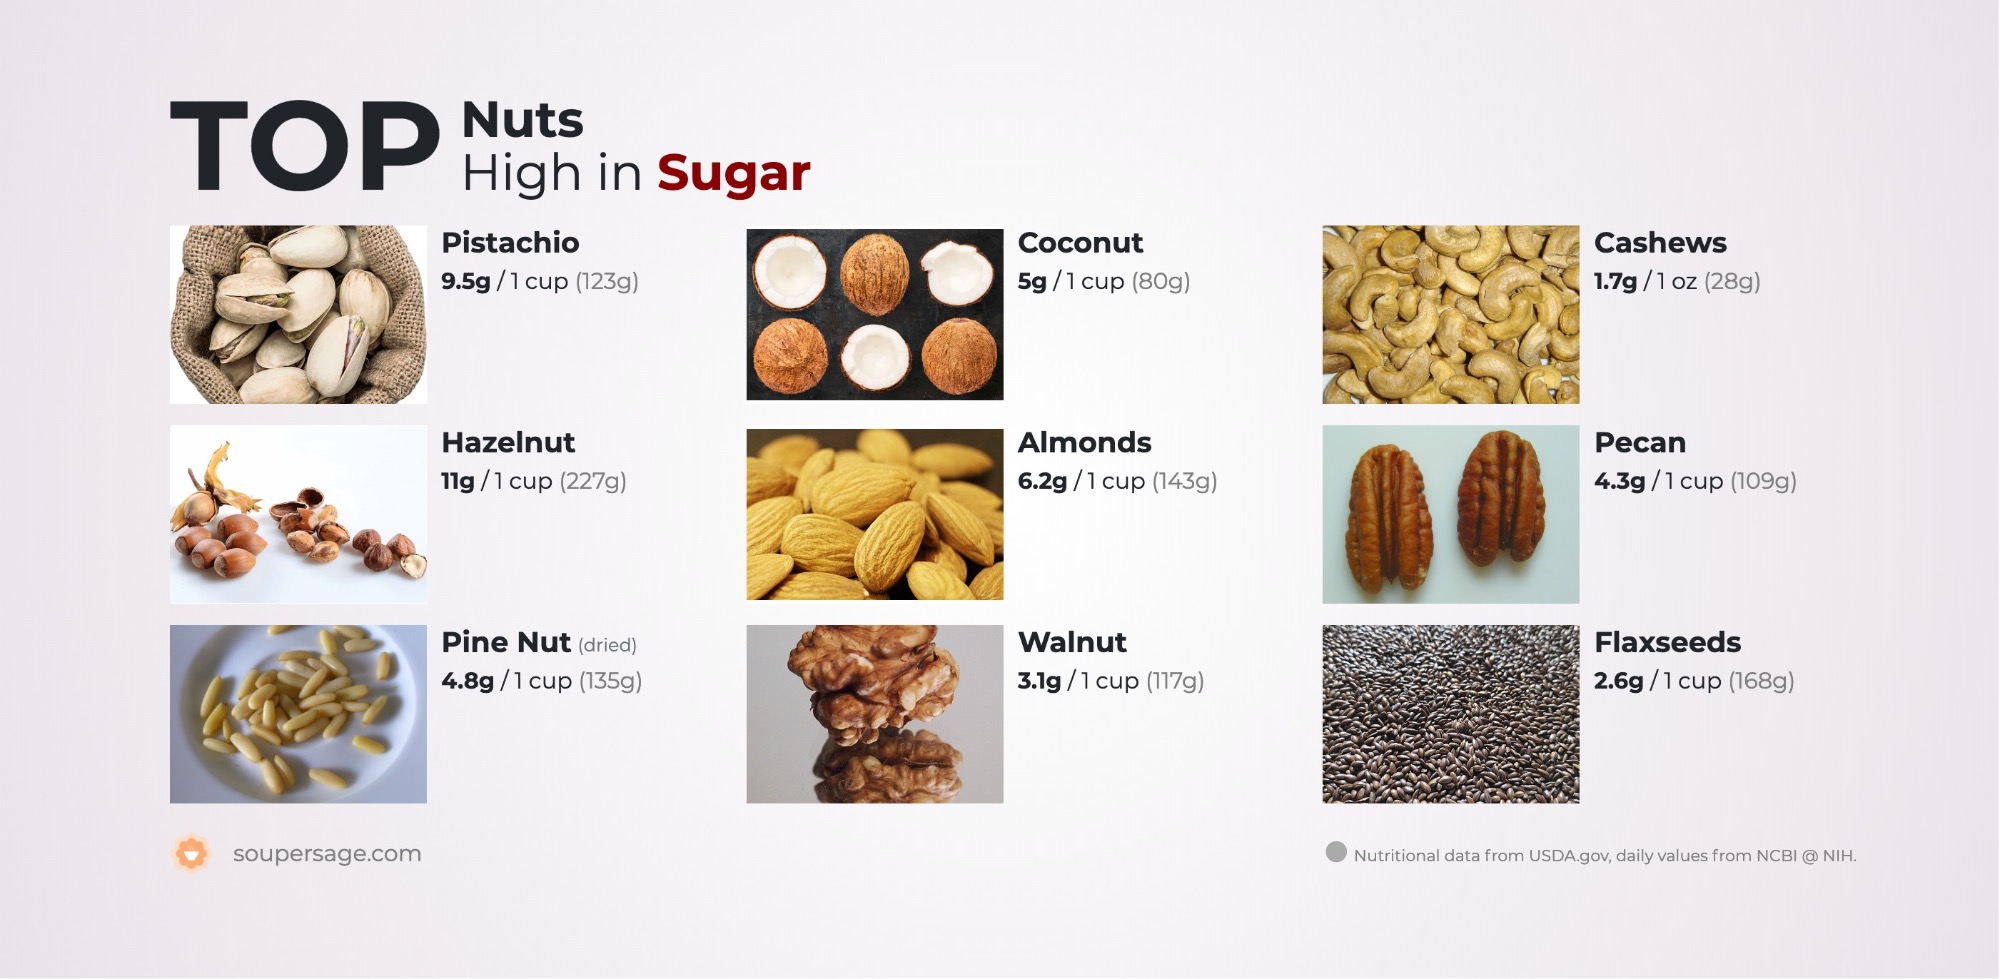 image of Top Nuts High in Sugar